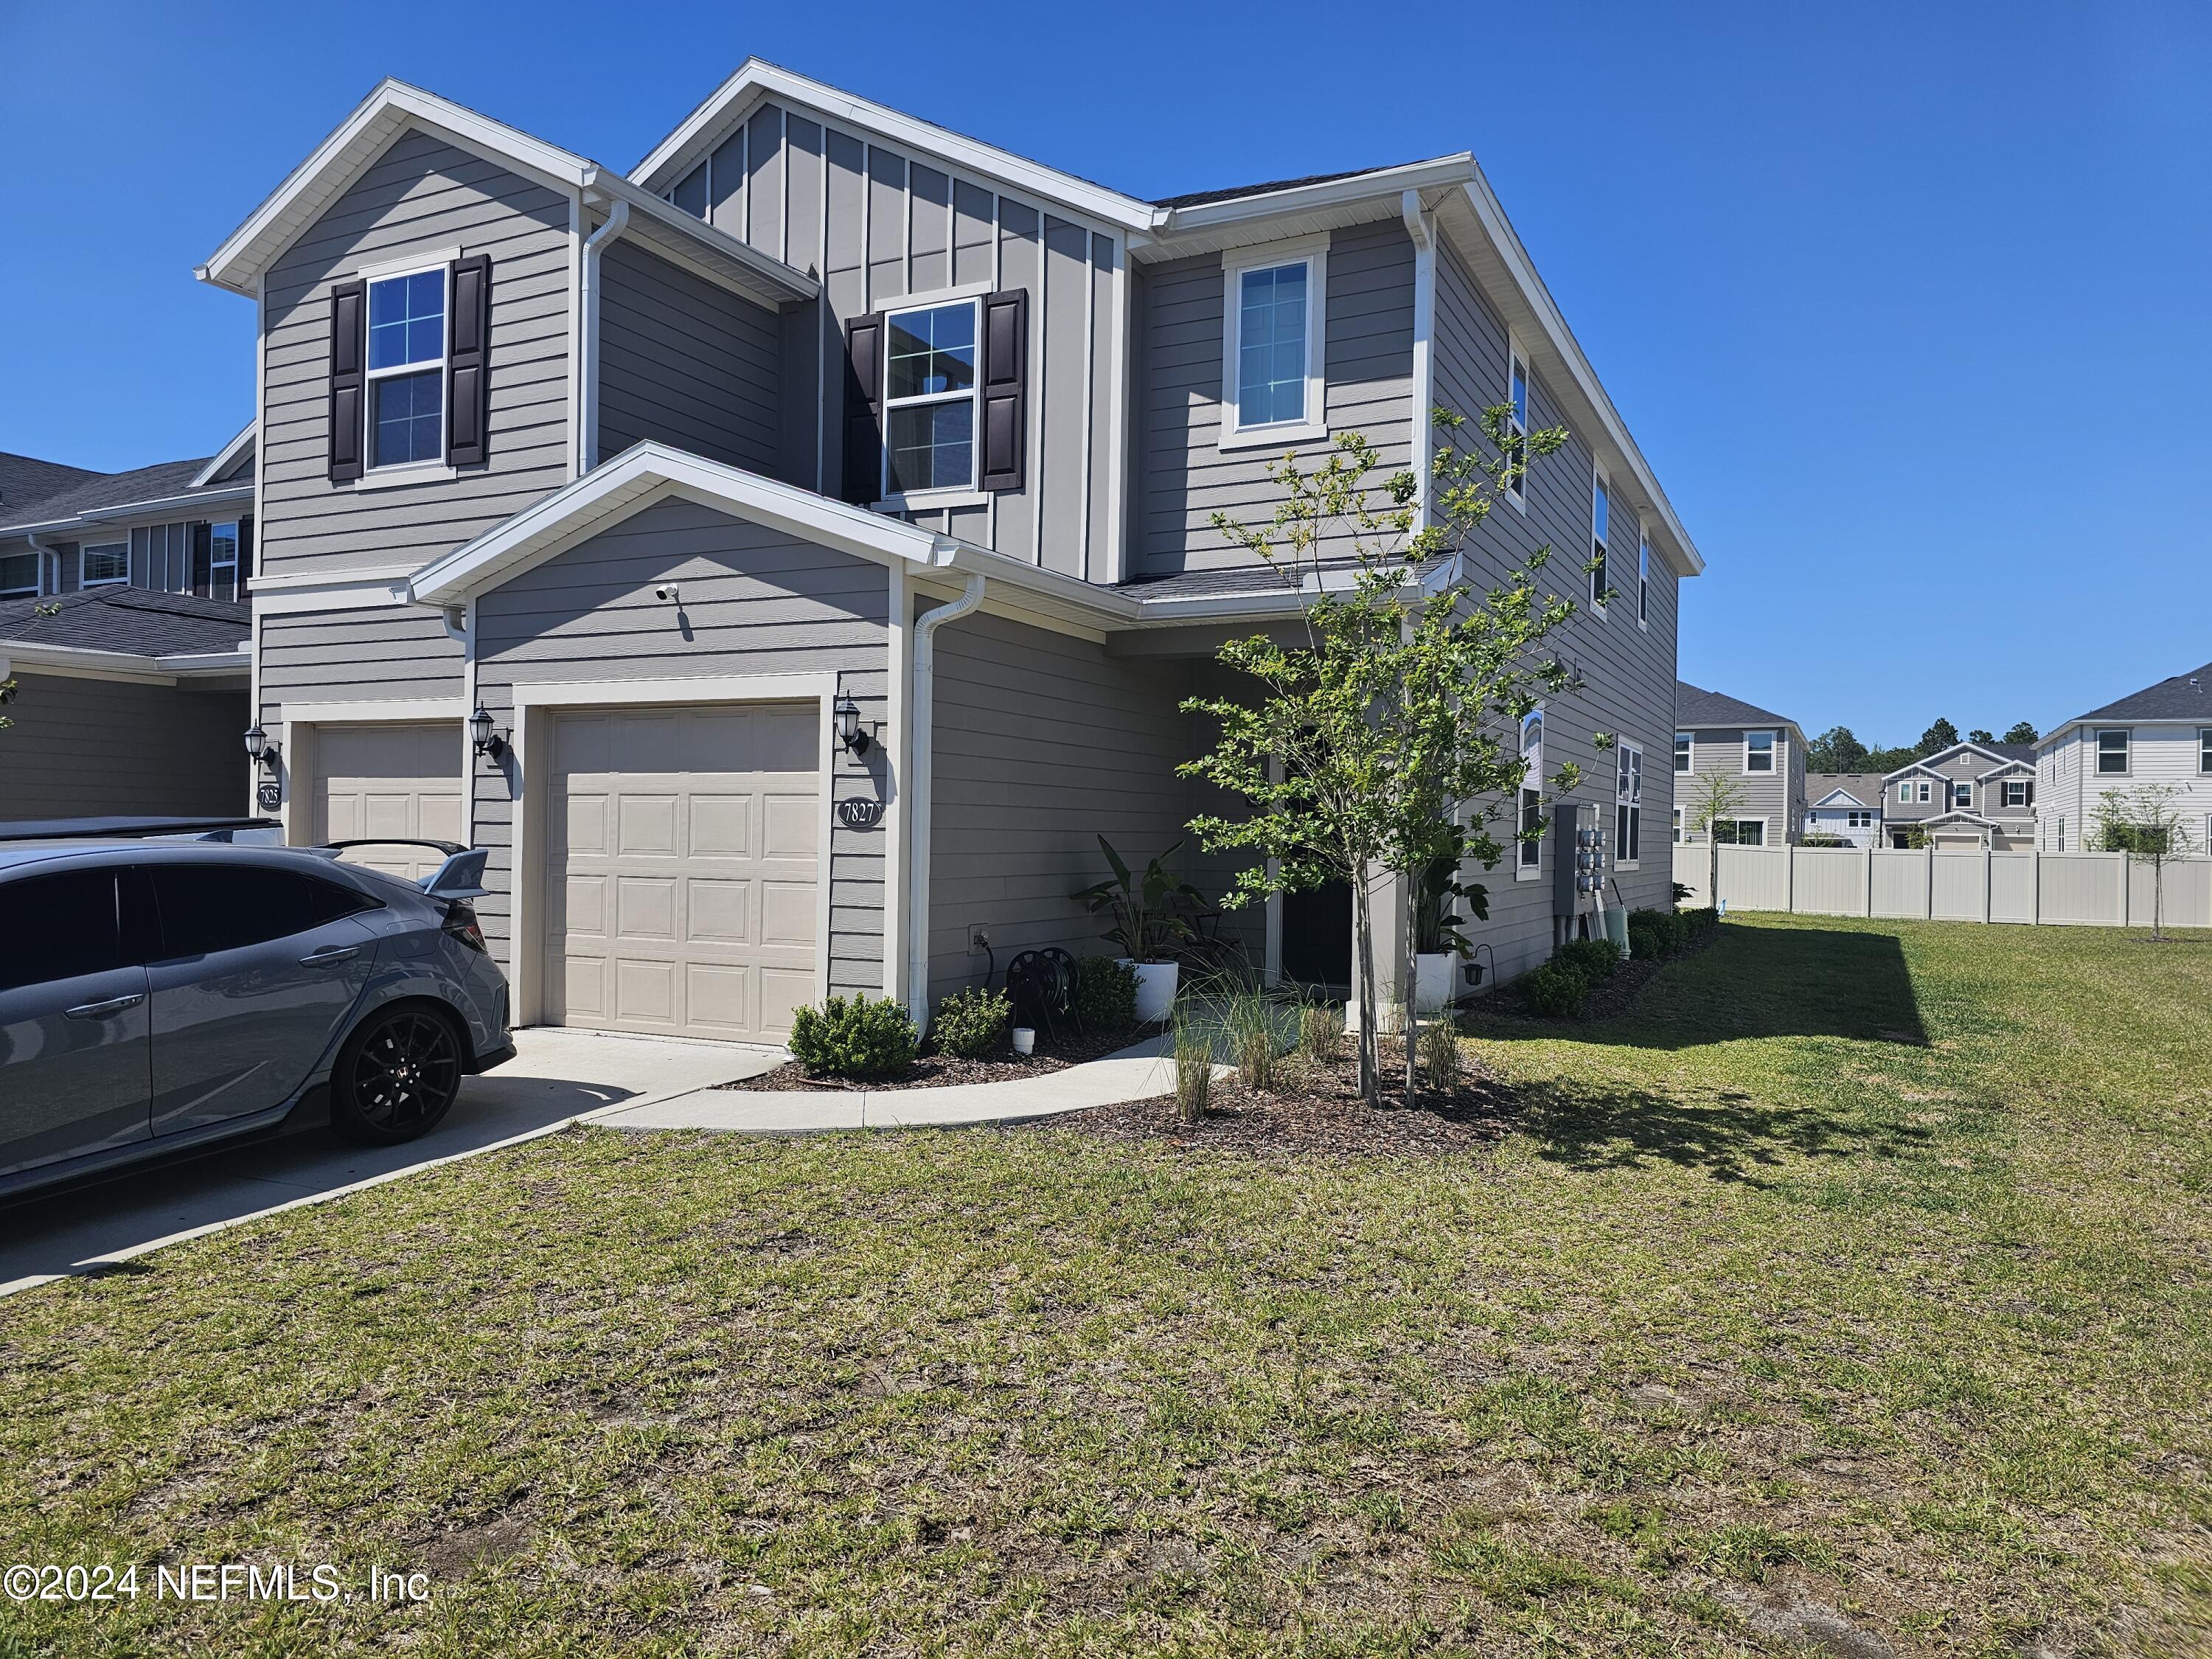 View Jacksonville, FL 32222 townhome